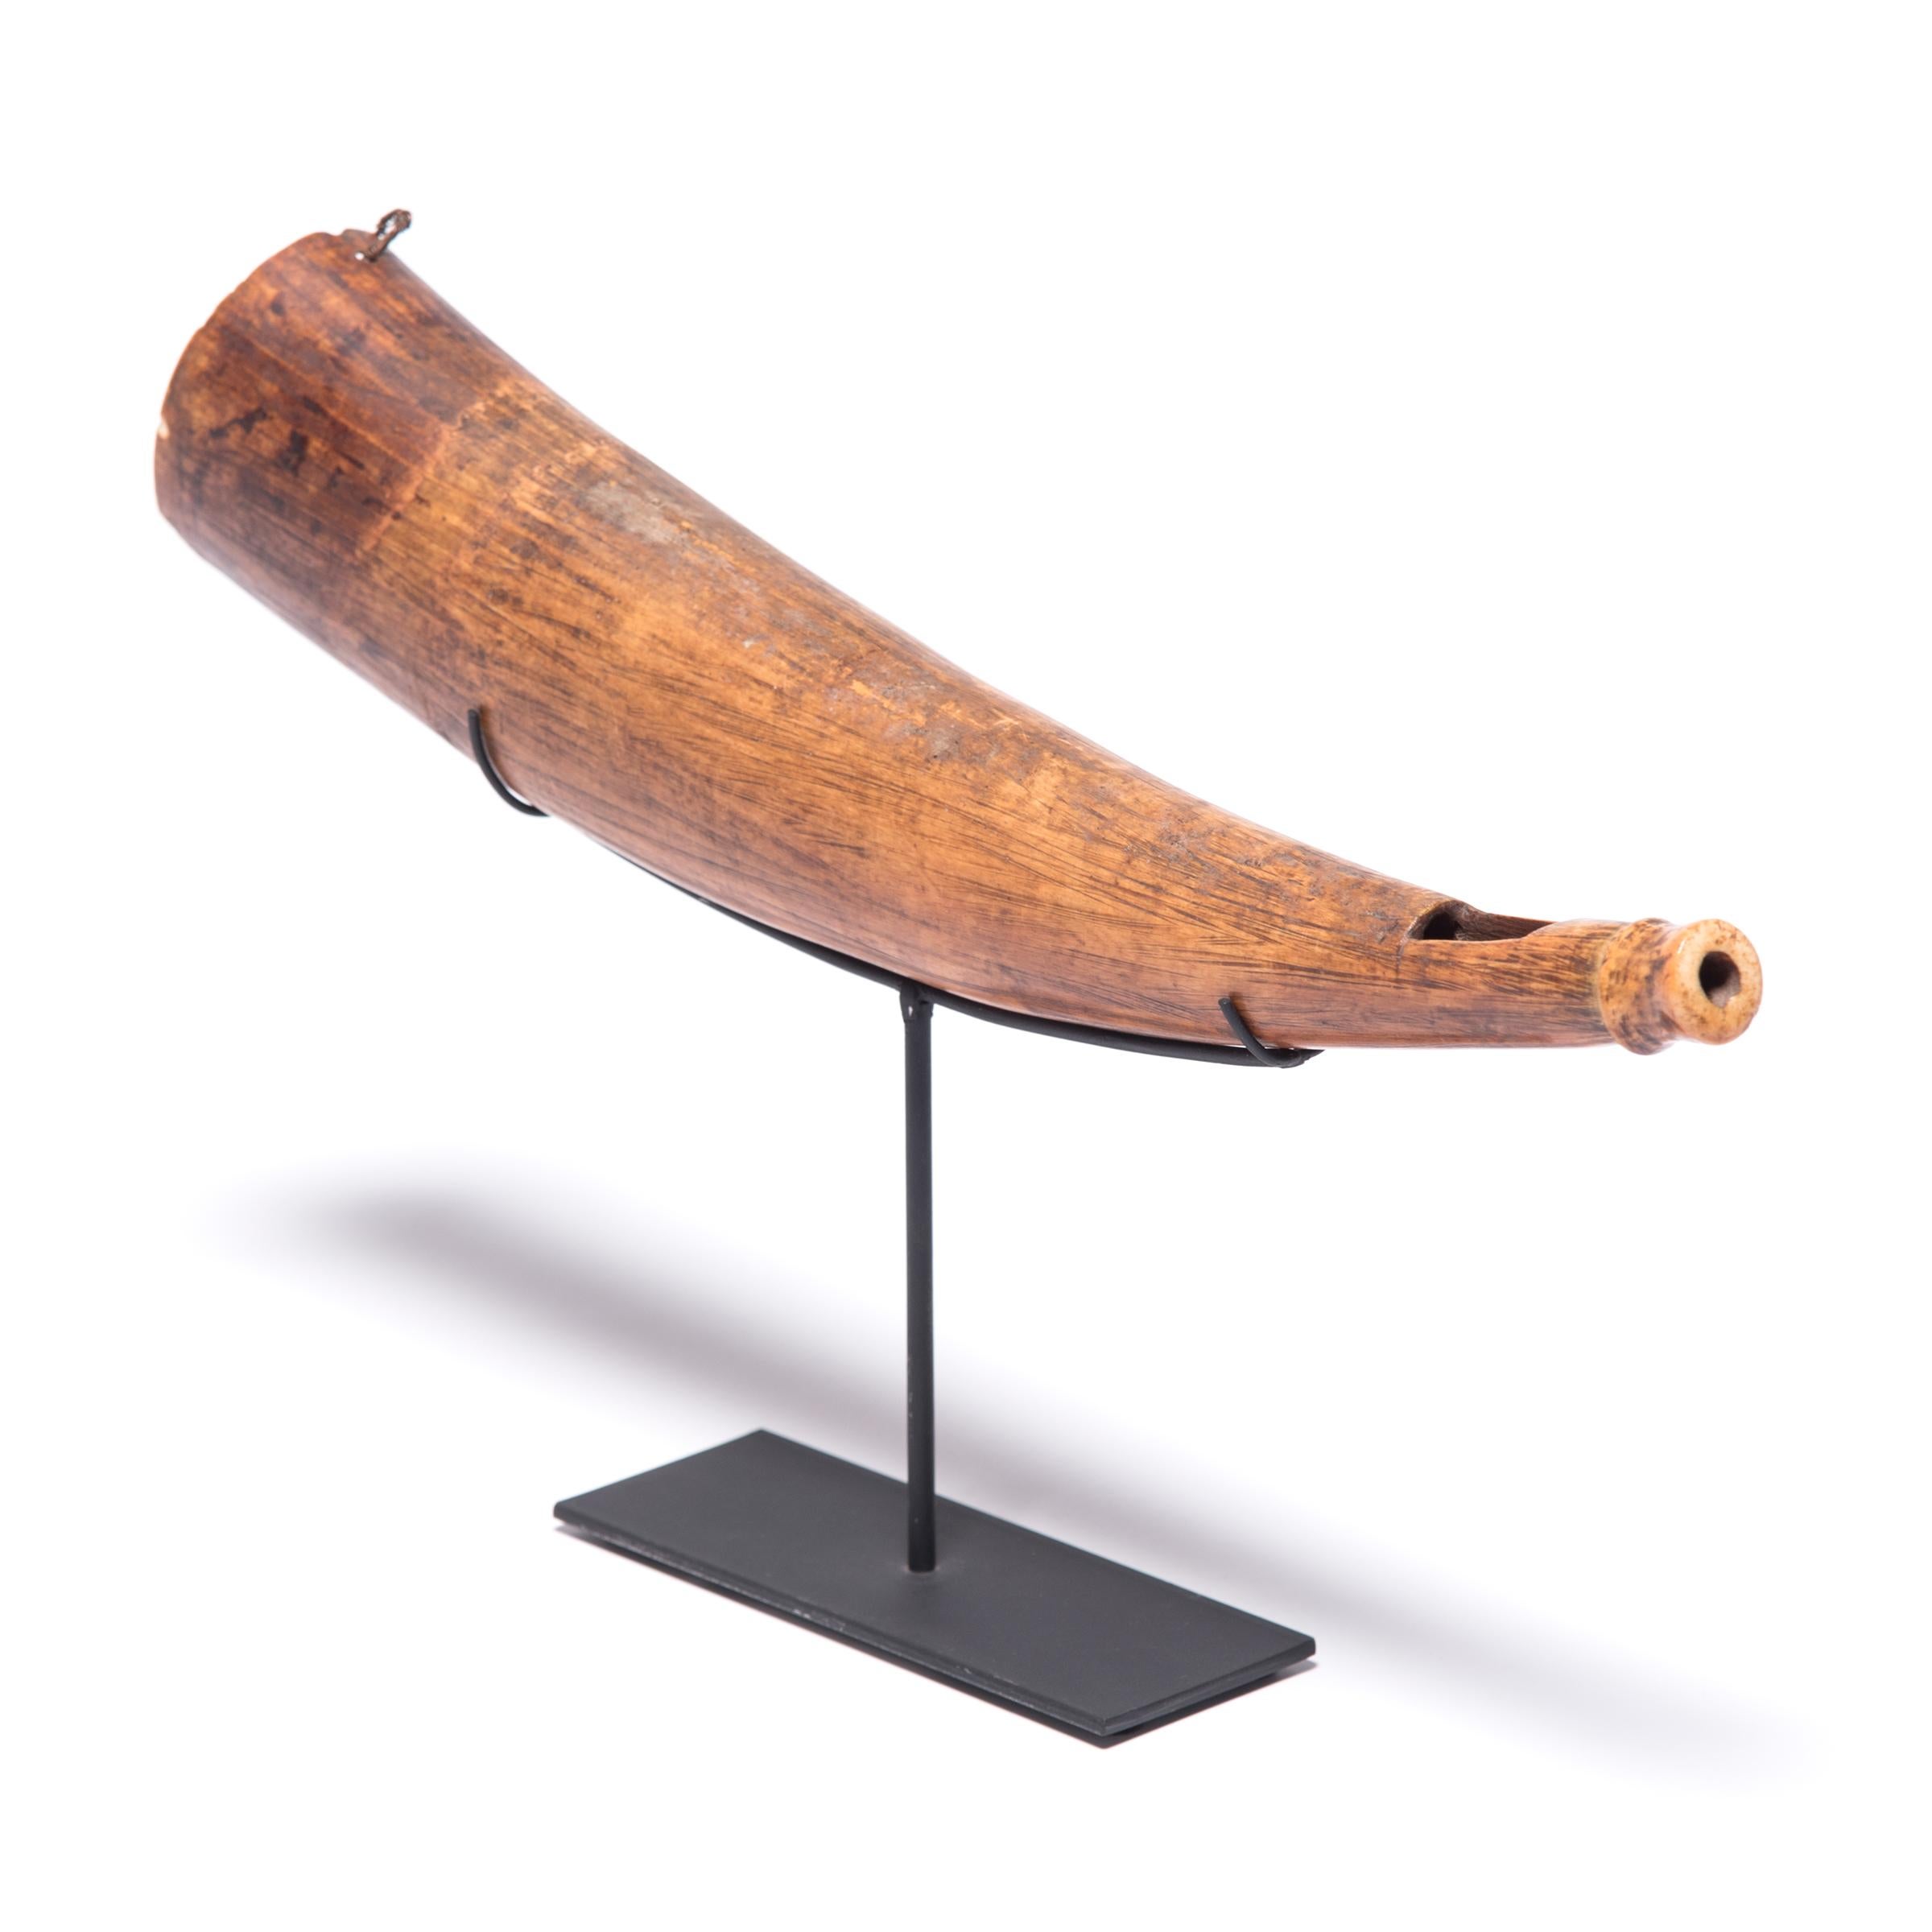 Crafted from a hollowed buffalo horn, this graceful object is a side-blown instrument known as a mbiu, used within Swahili-speaking groups of east Africa. Unlike the ornate siwa horns held by chiefs or kings, often of lavishly carved ivory, the mbiu